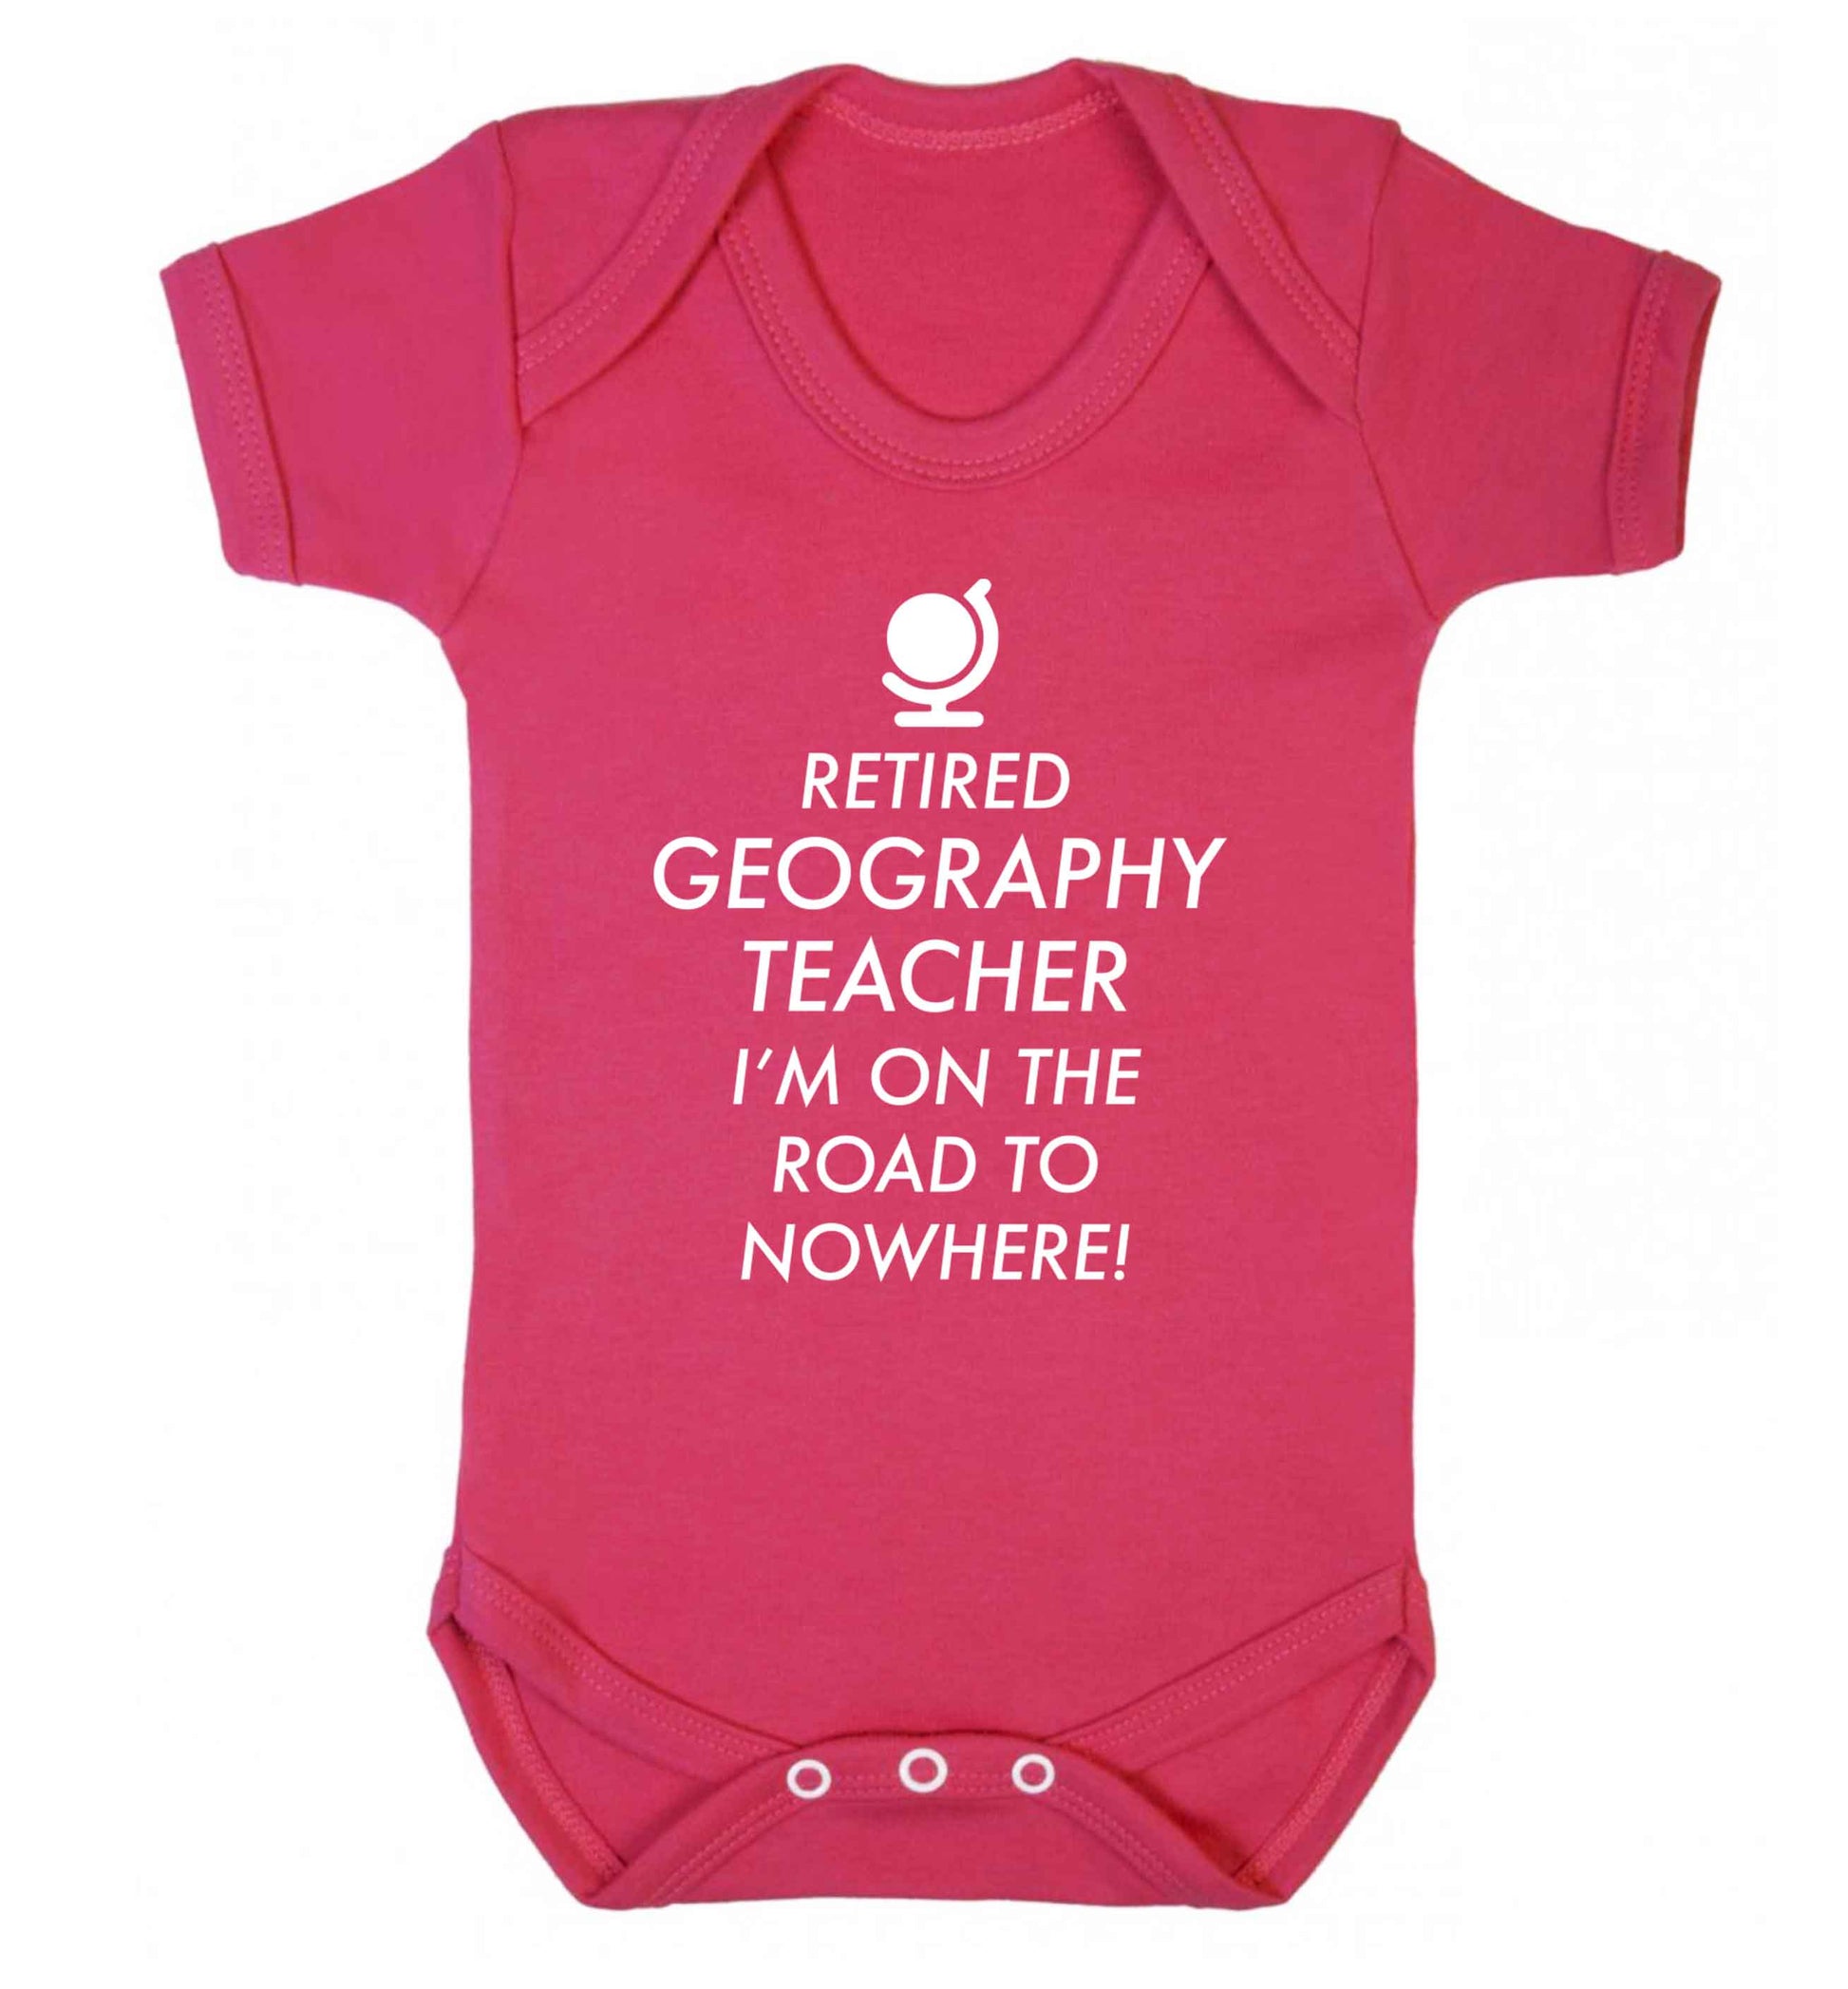 Retired geography teacher I'm on the road to nowhere Baby Vest dark pink 18-24 months